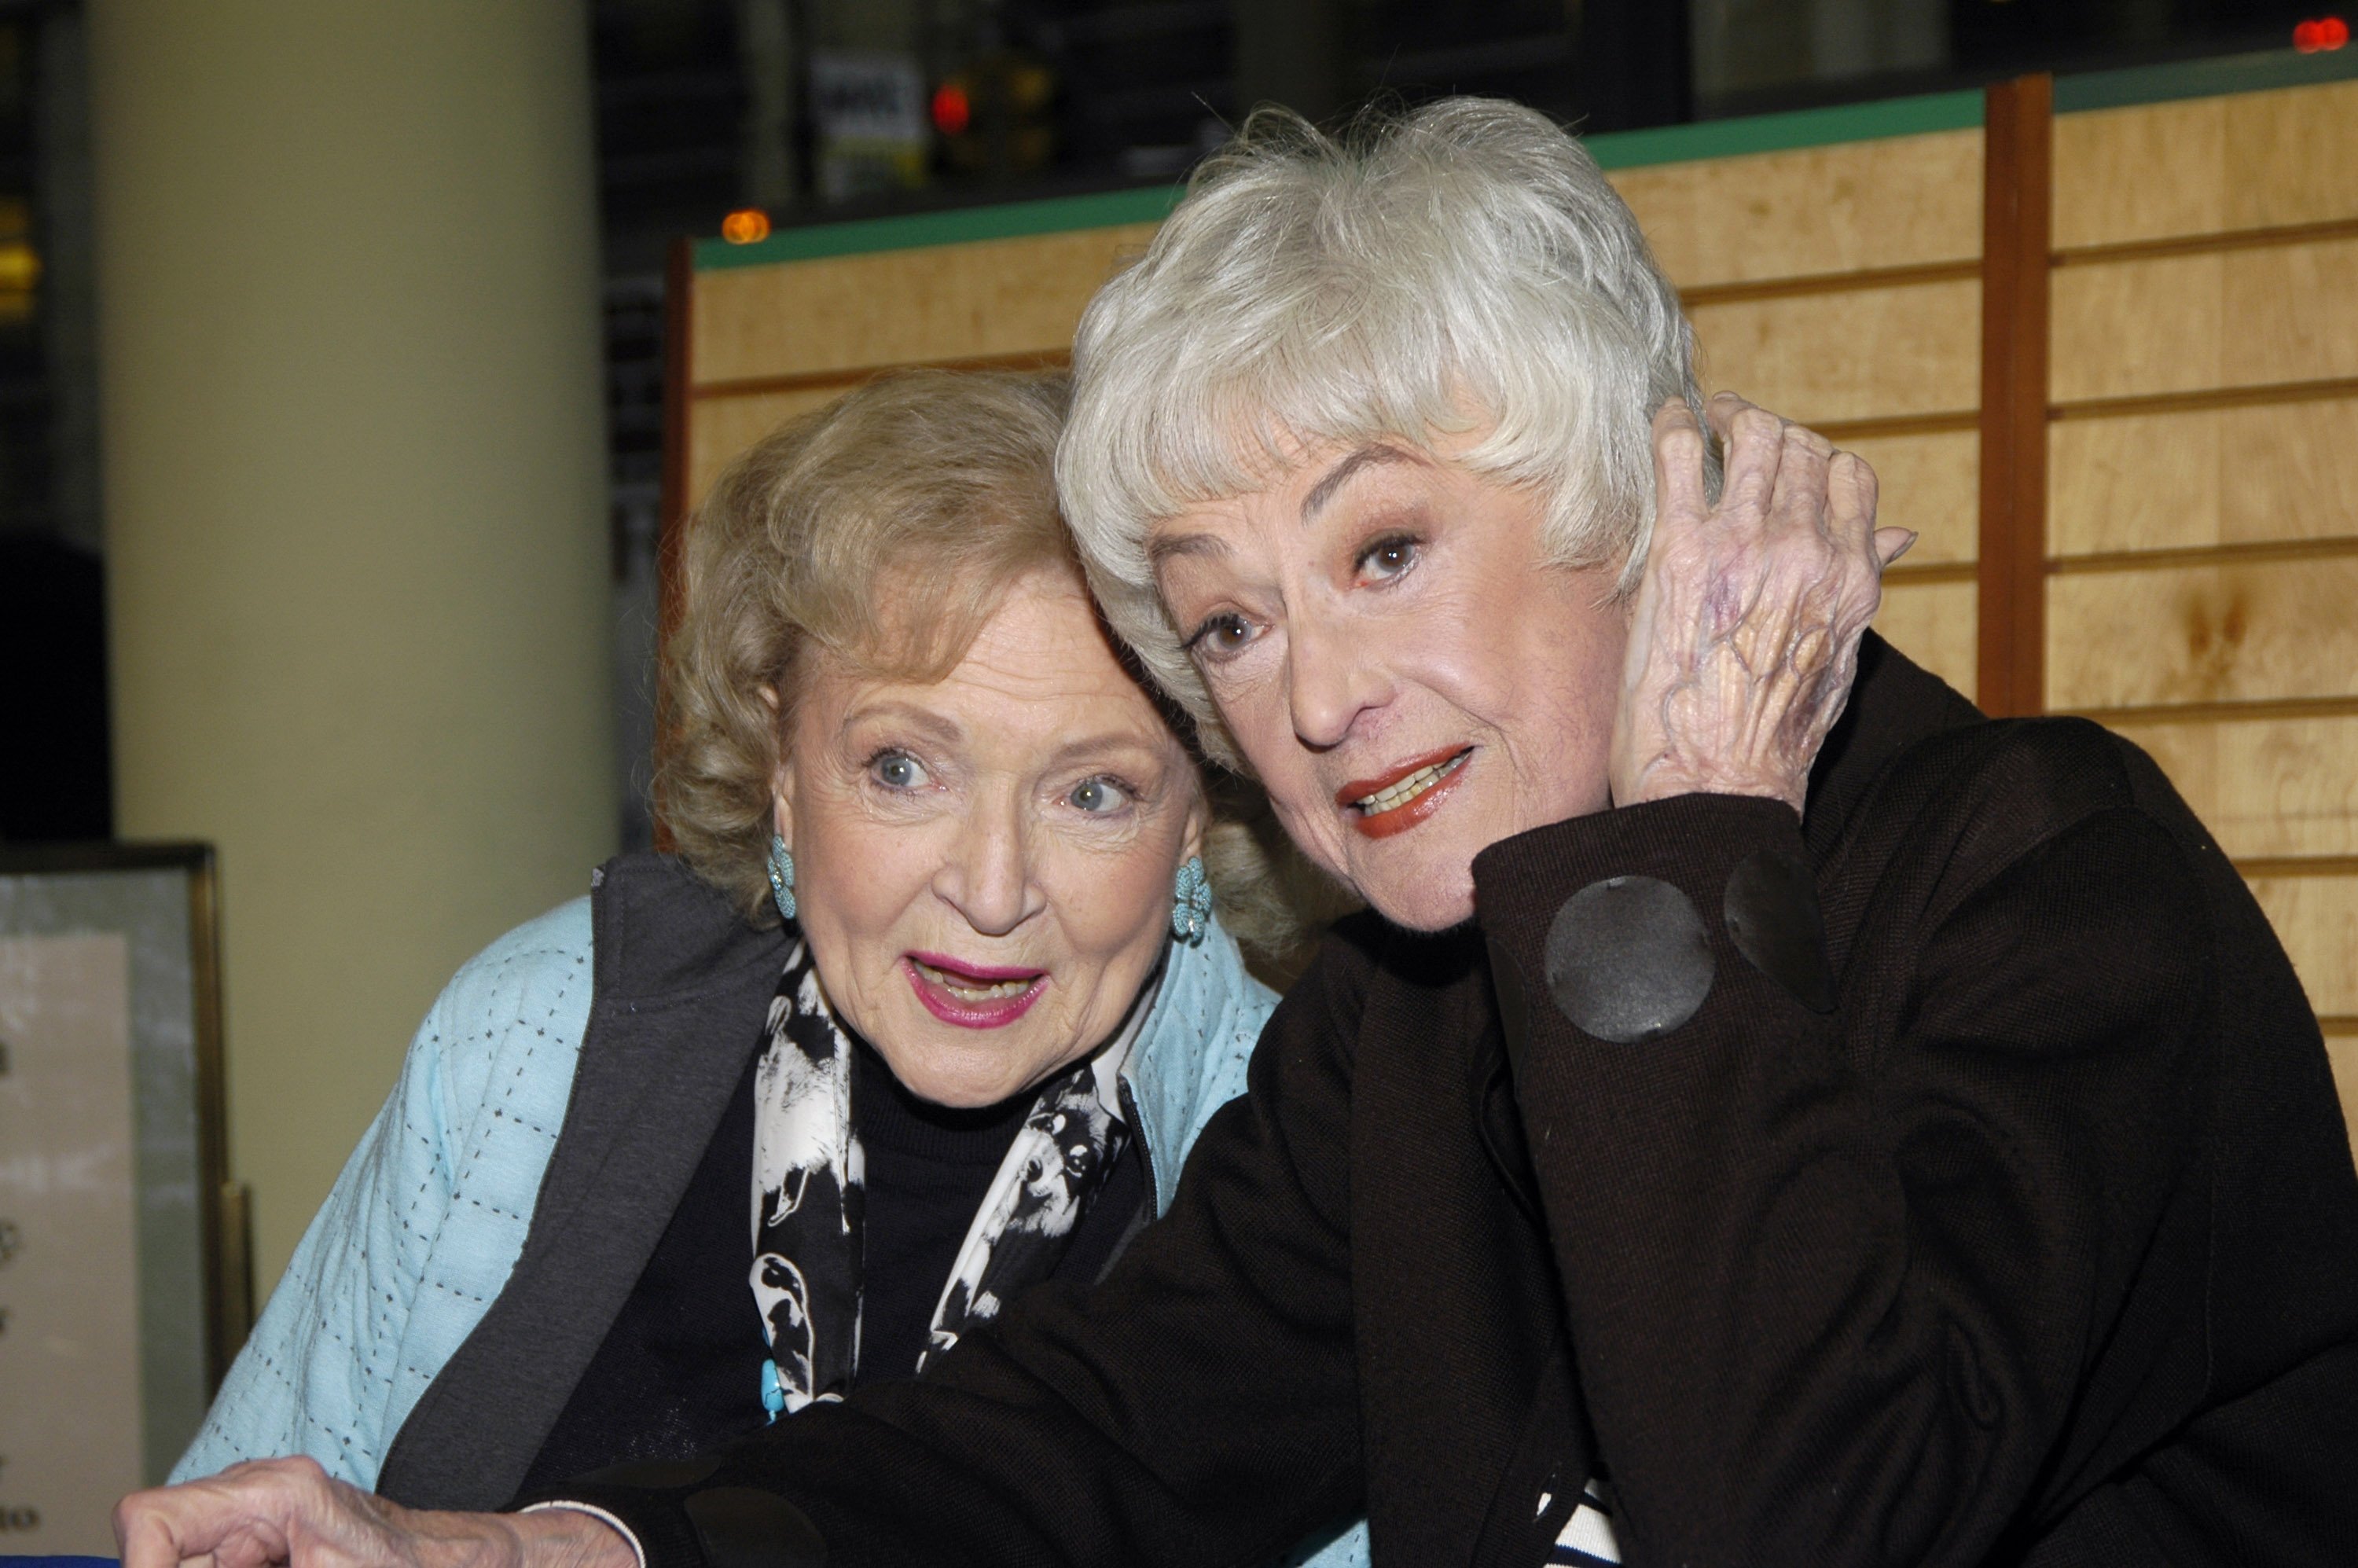 Betty White and Bea Arthur chat at a signing event at Barnes and Noble in New York City in 2005